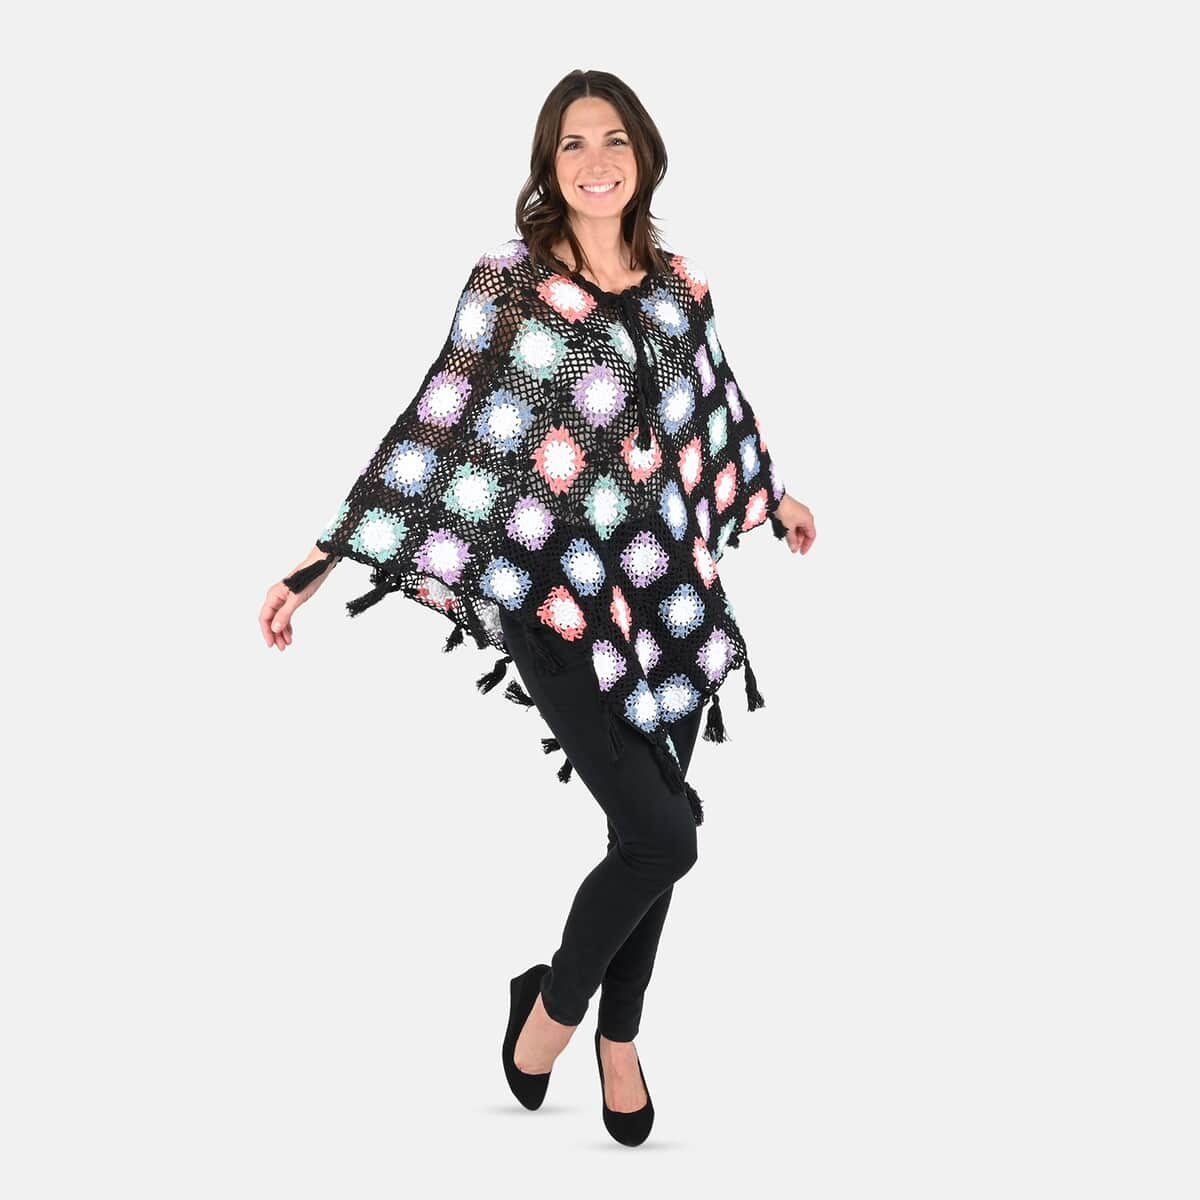 Passage Women's Cotton Poncho Crochet Black and Multi Color Square Poncho (One Size) image number 0